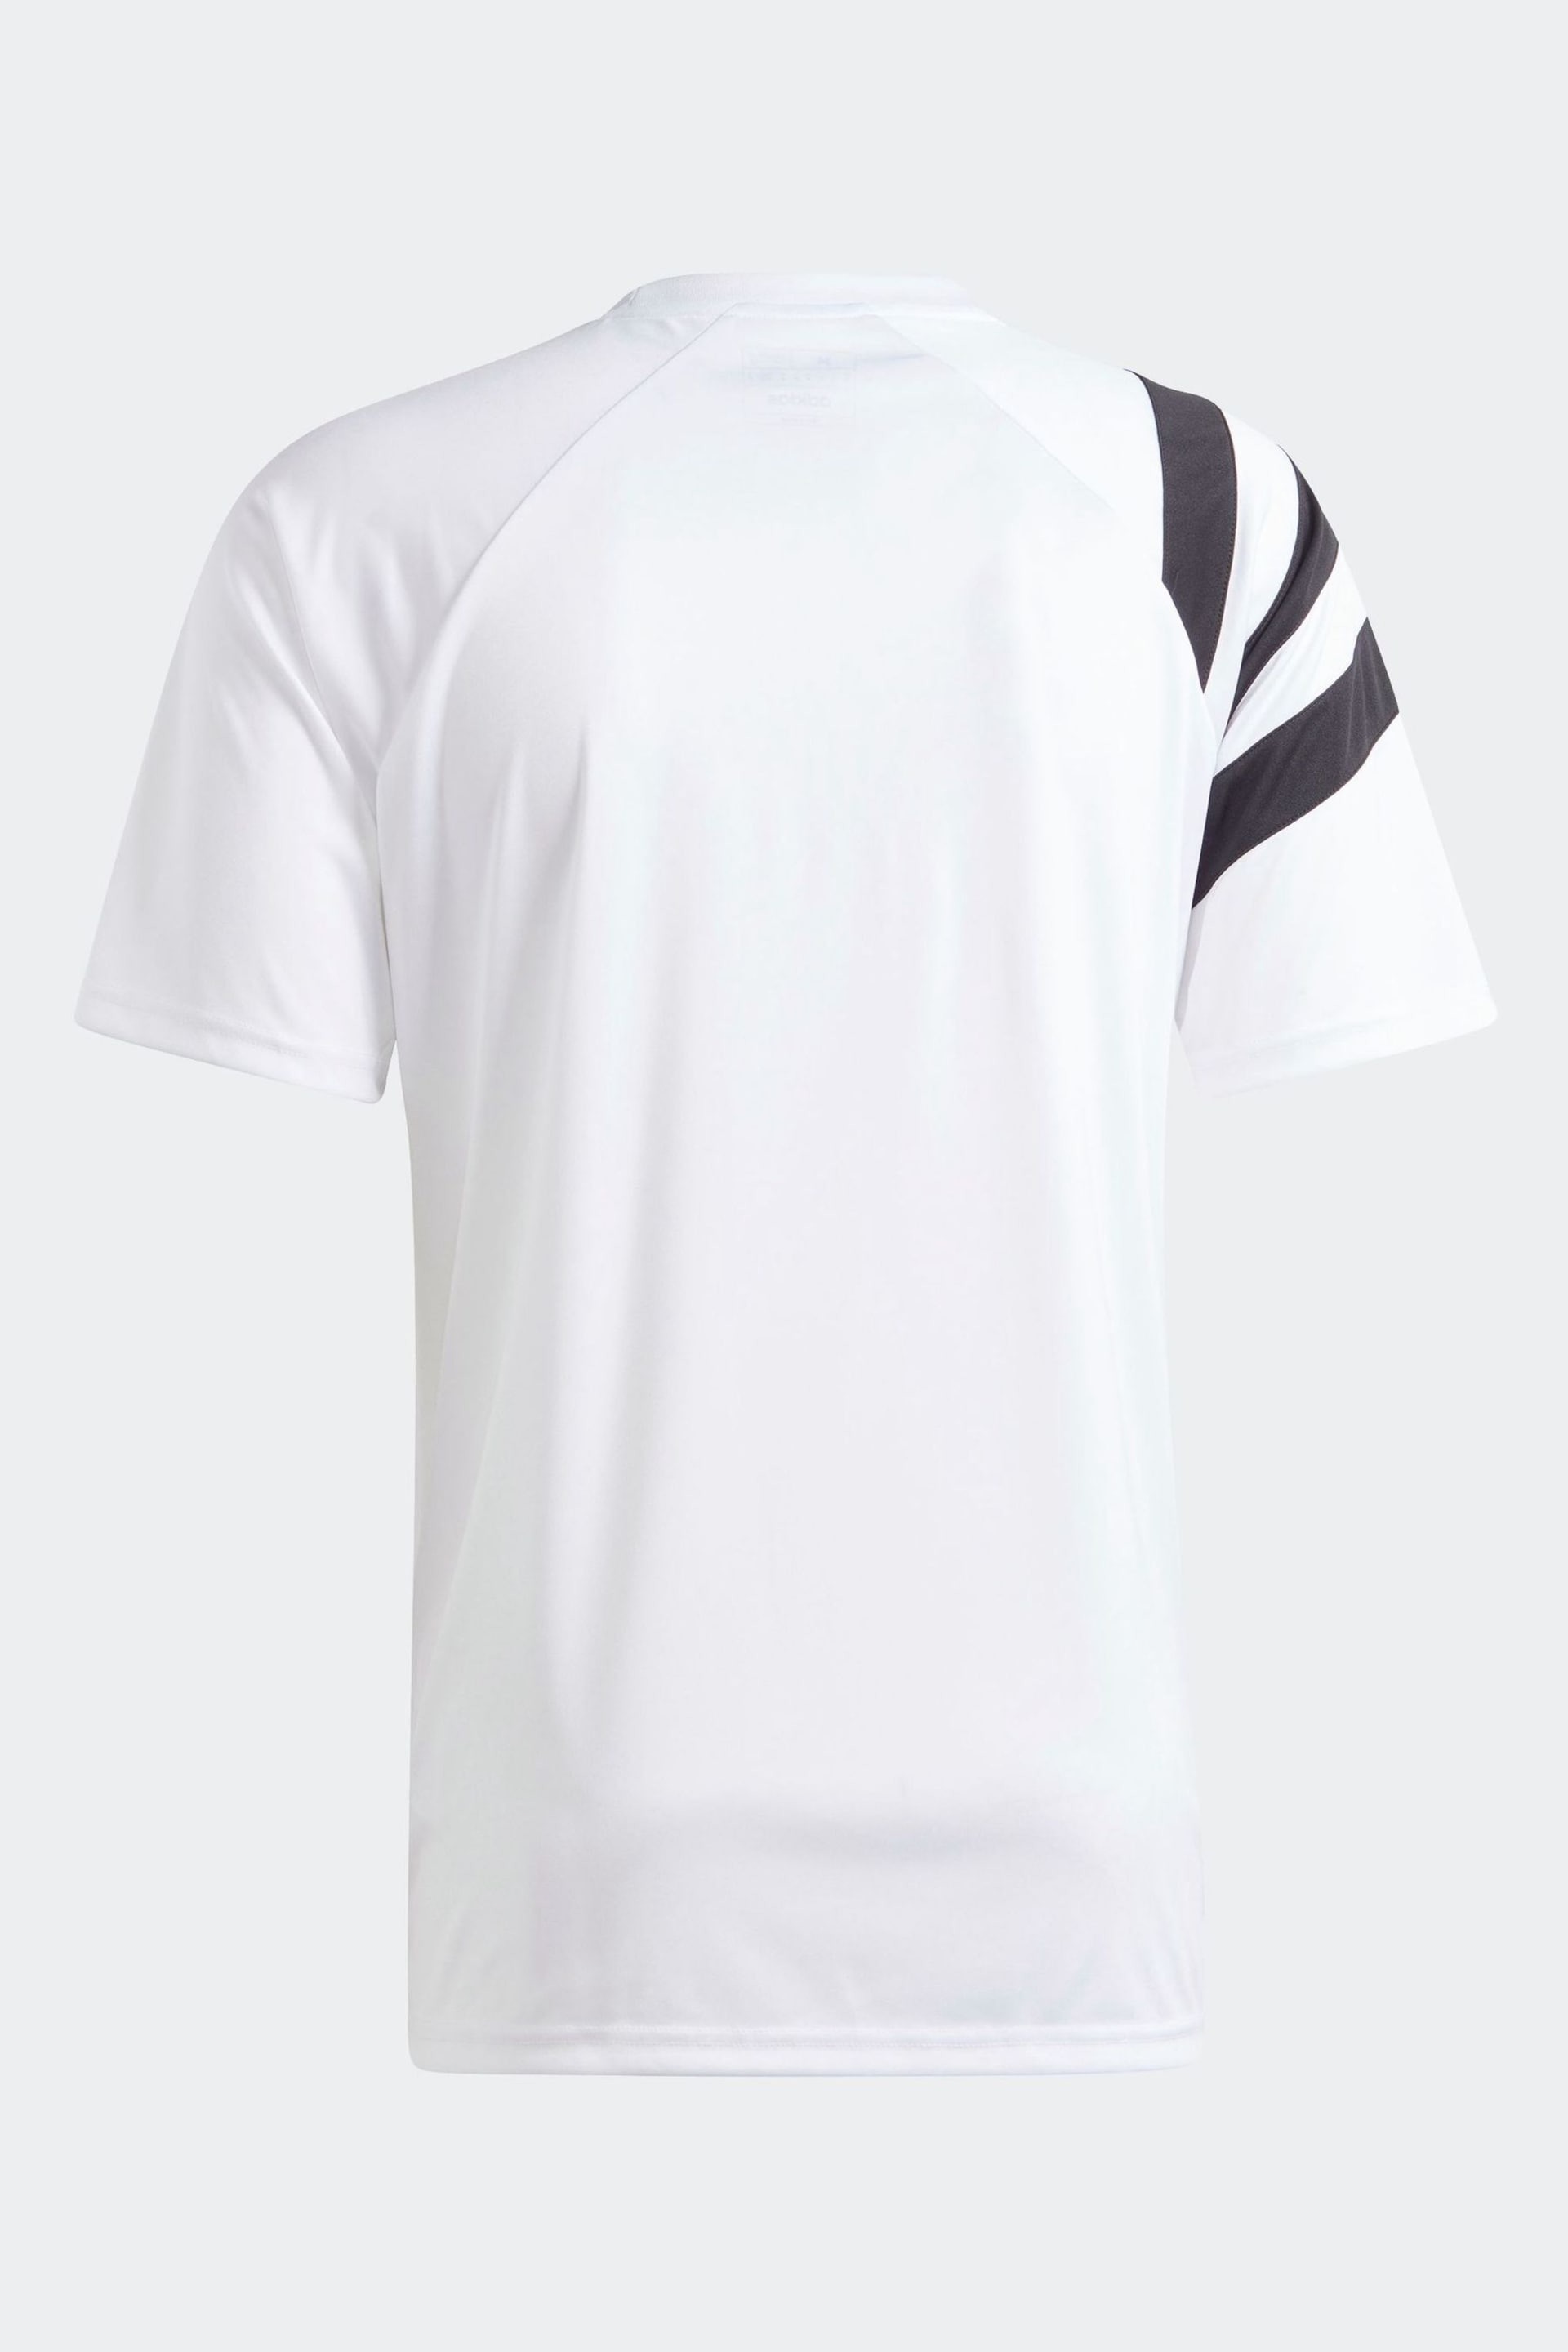 adidas White Fortore 23 Jersey - Image 8 of 8